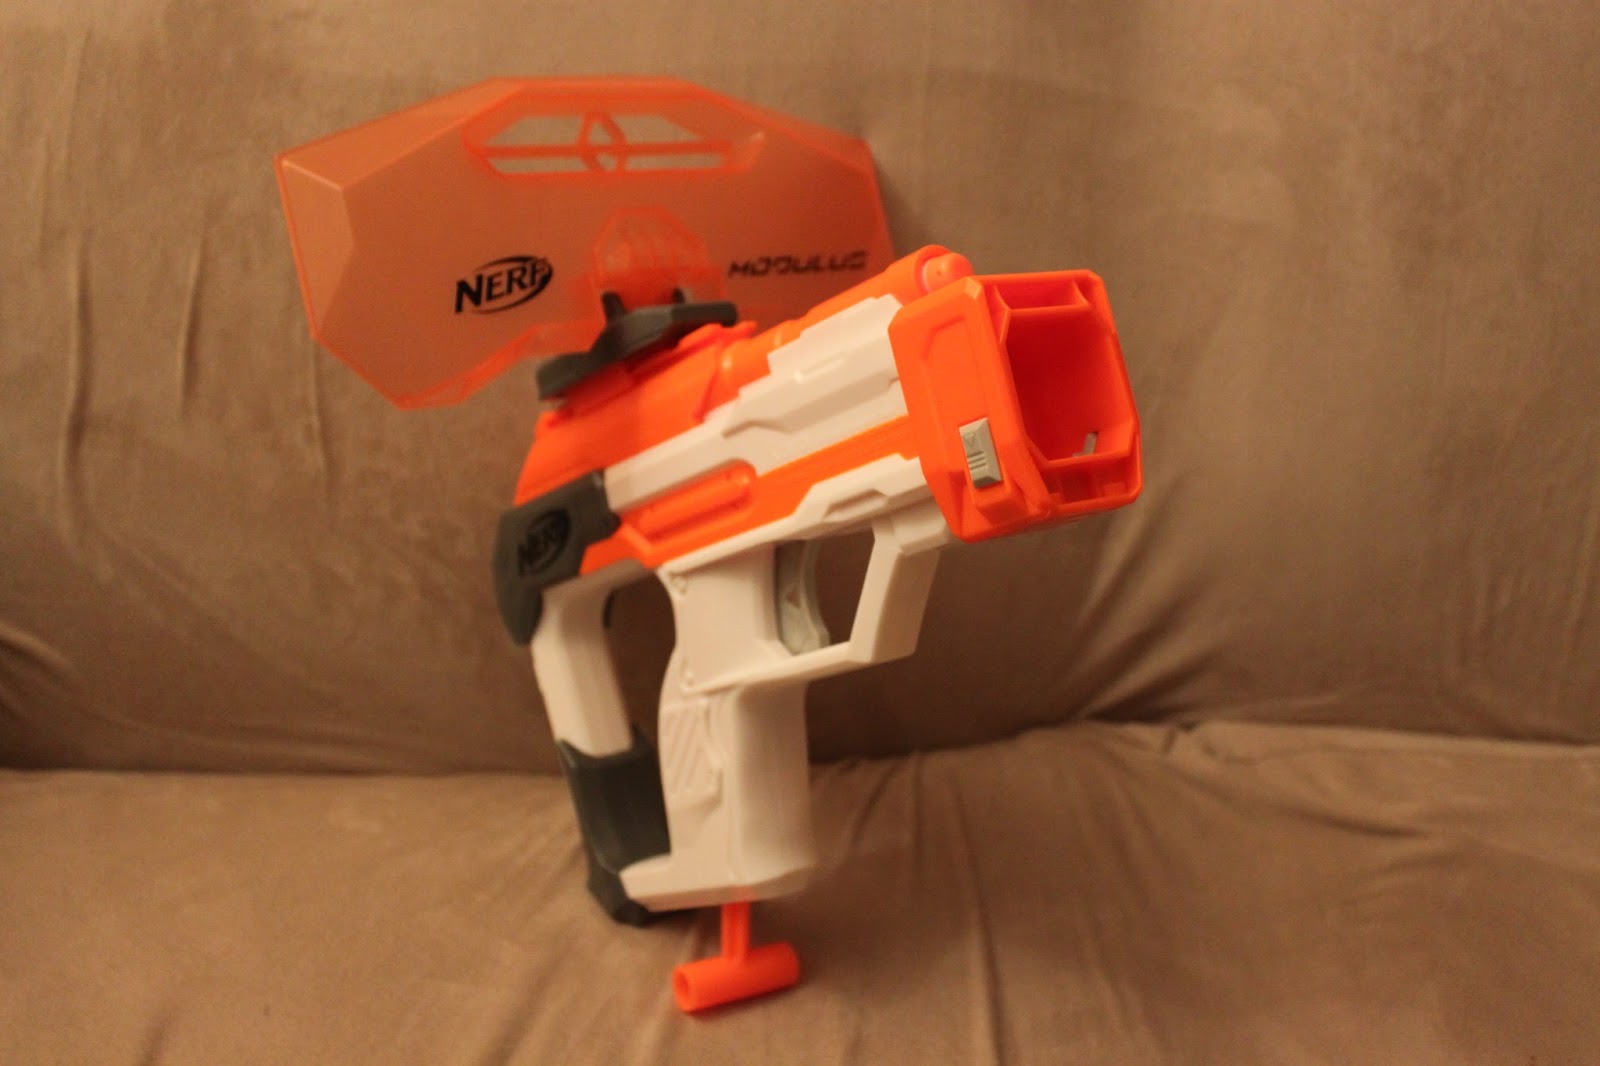 Tactical Tag: Modulus "Strike and Defend"